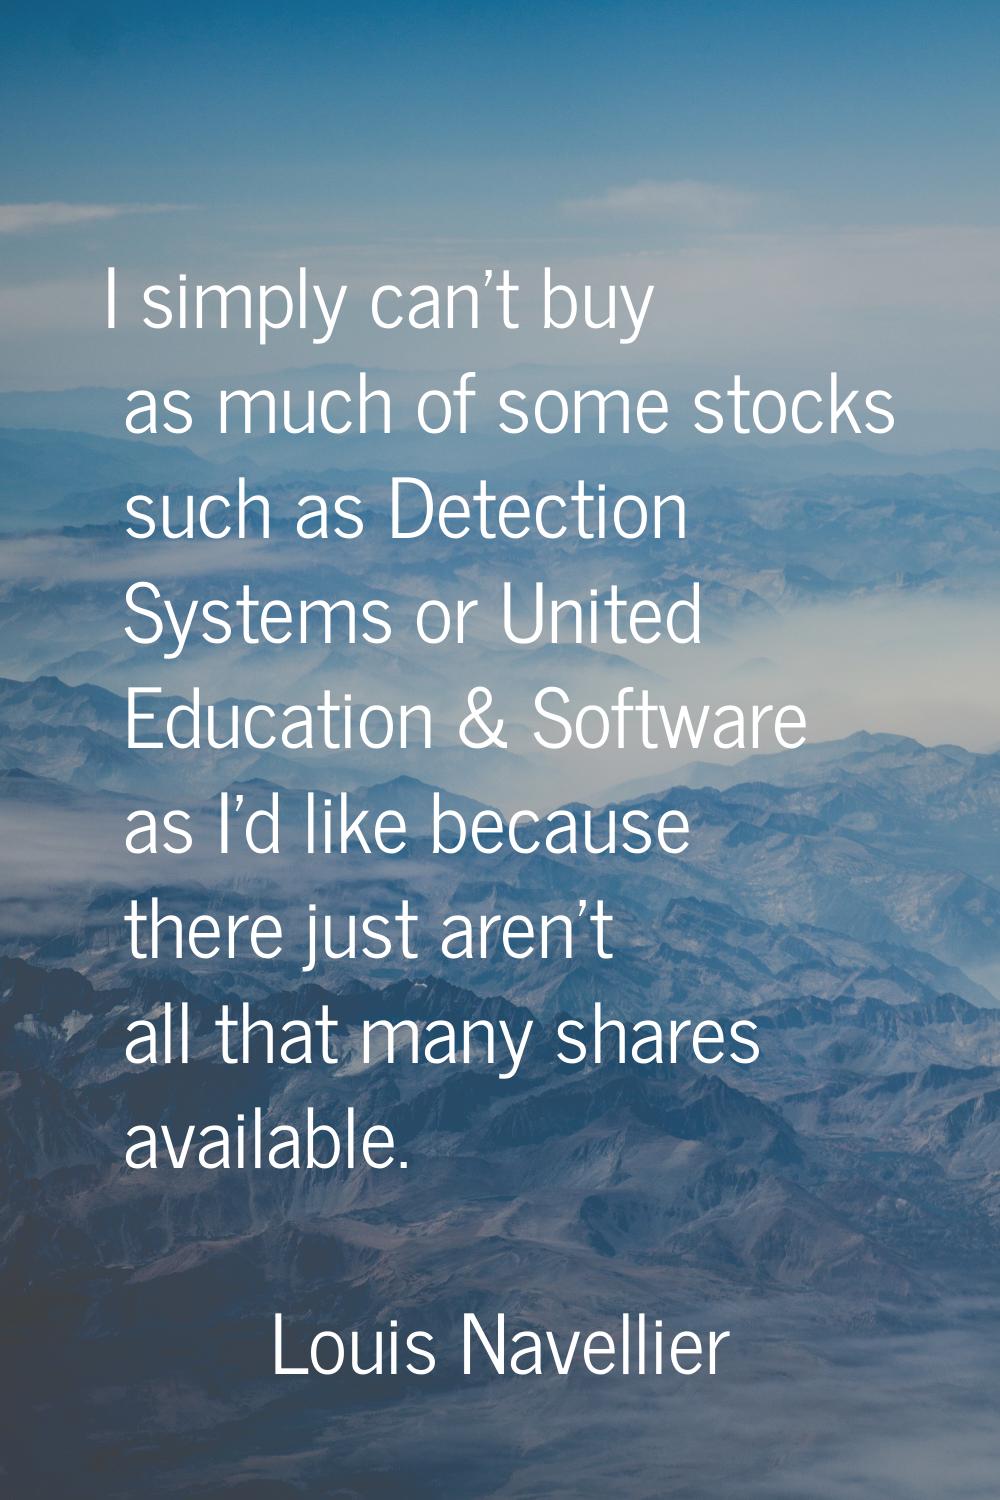 I simply can't buy as much of some stocks such as Detection Systems or United Education & Software 